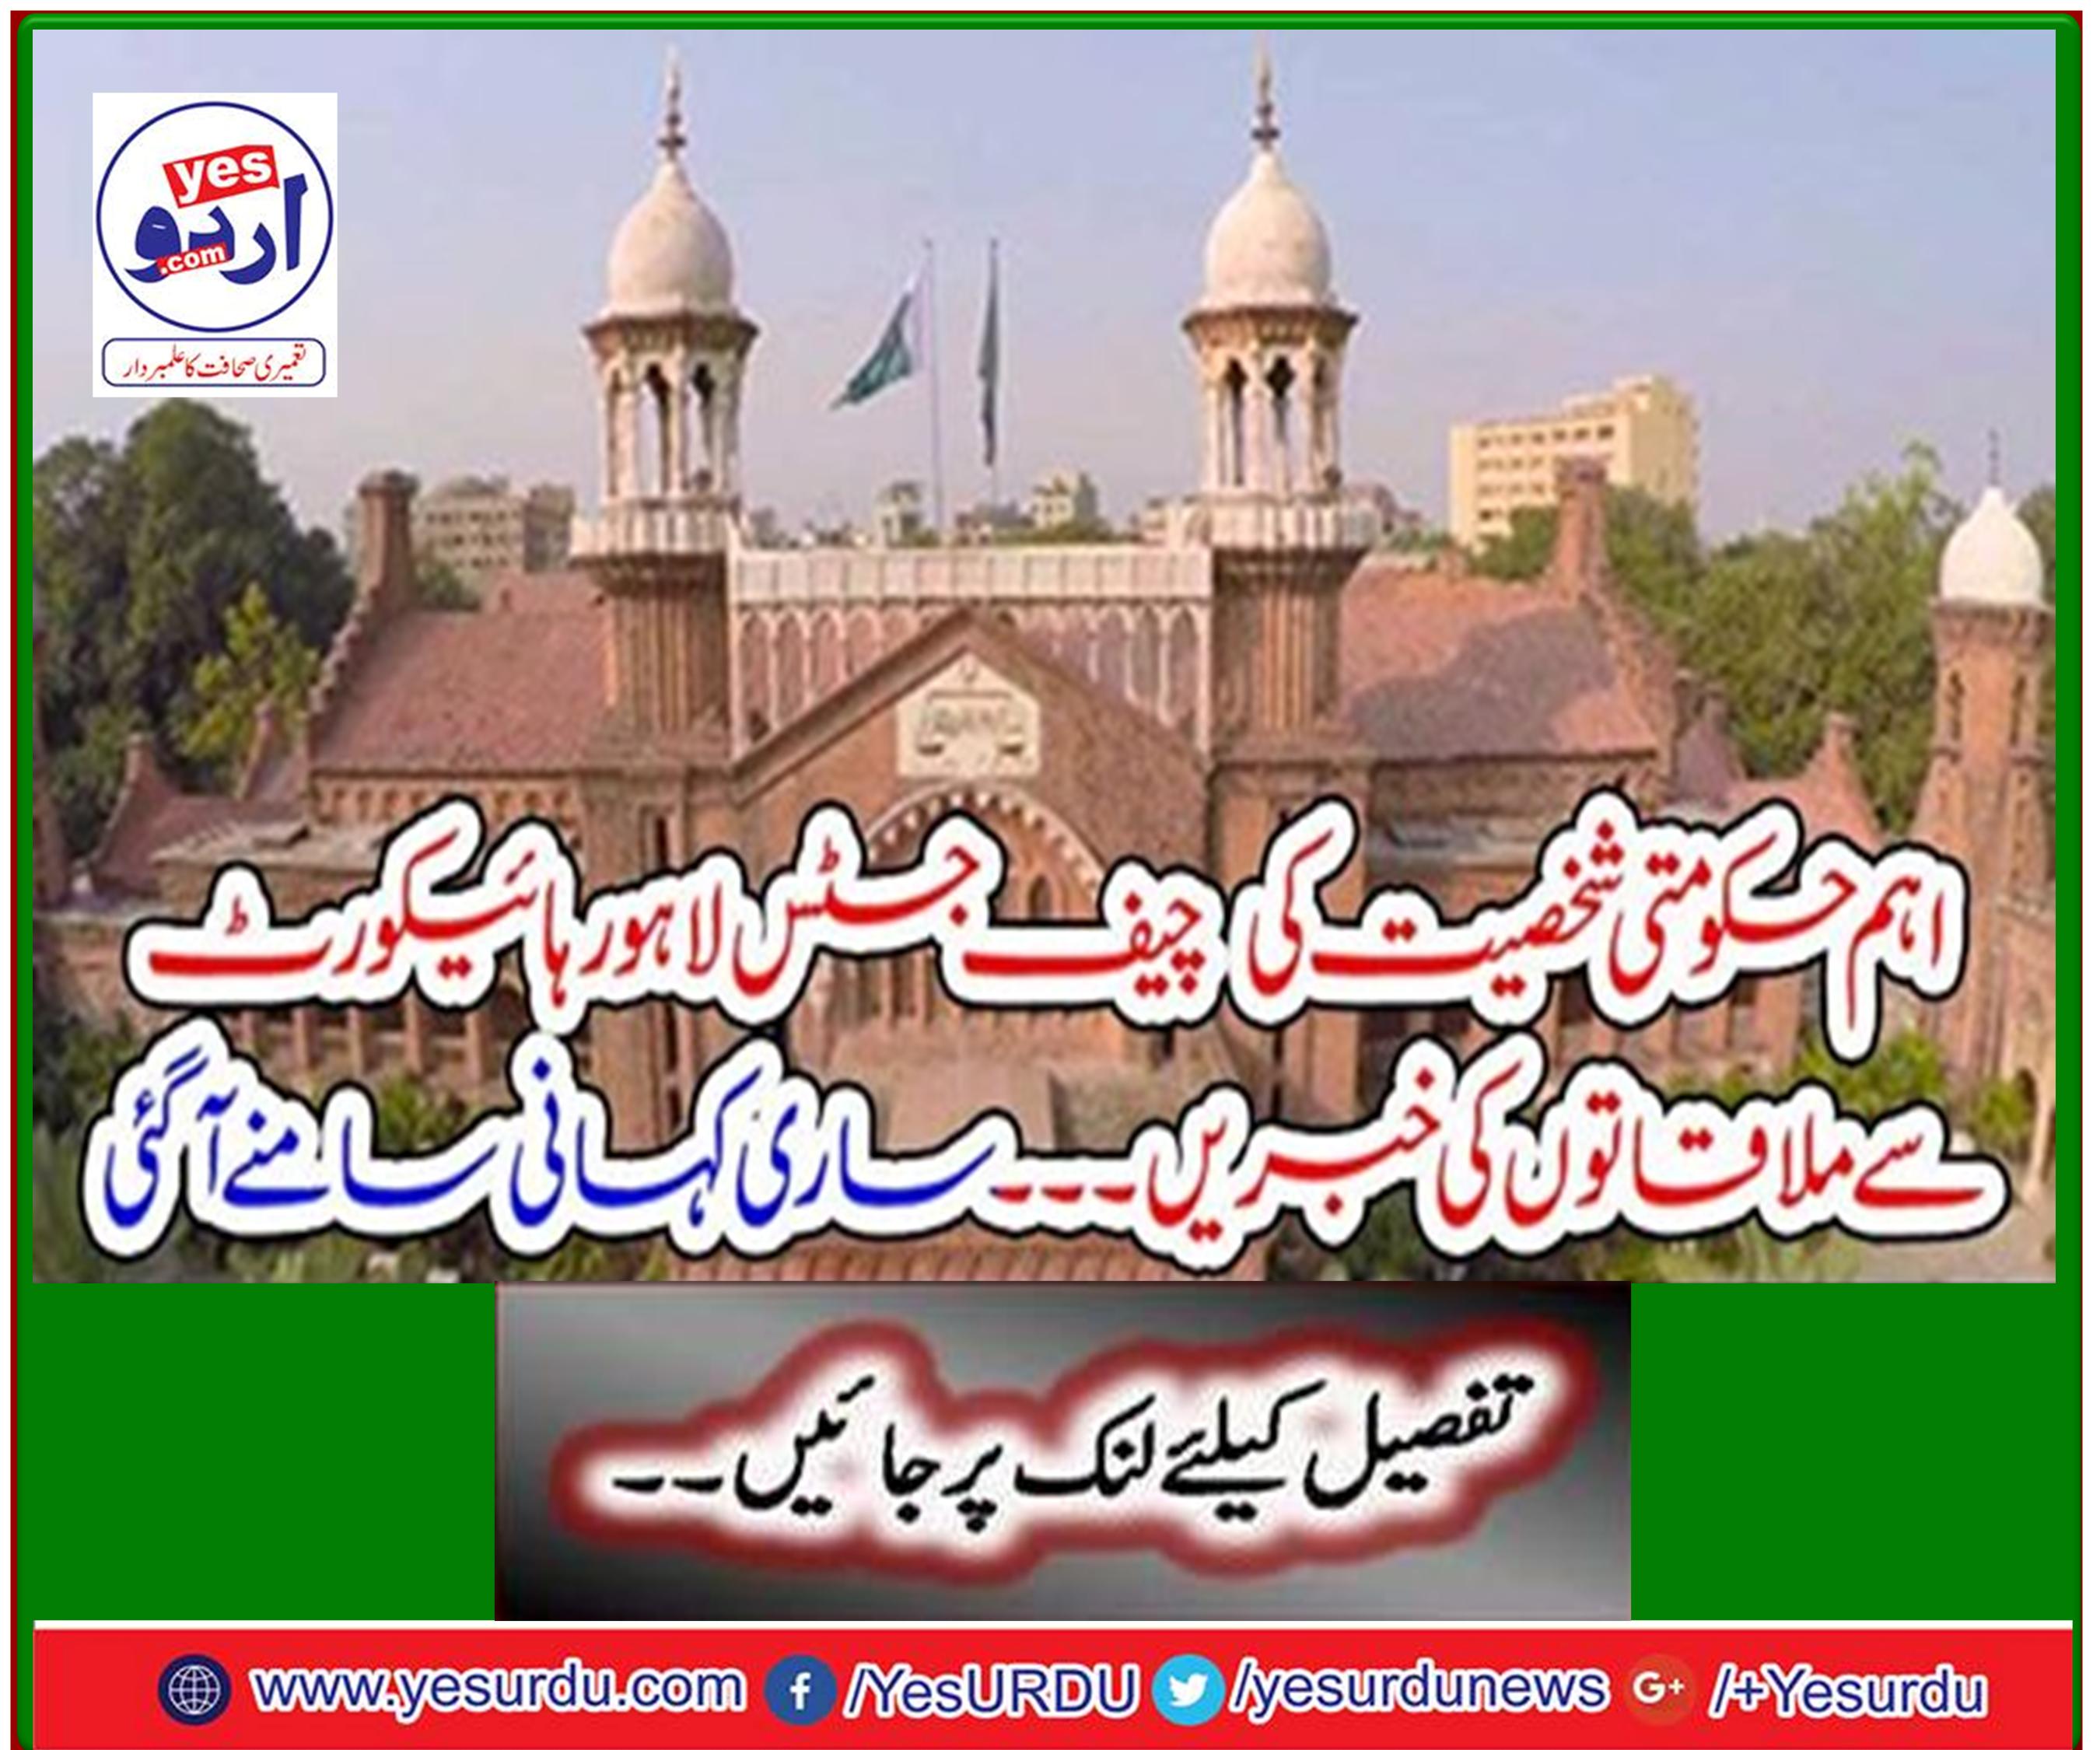 News of meeting with Chief Justice of Lahore High Court - All story unfolds